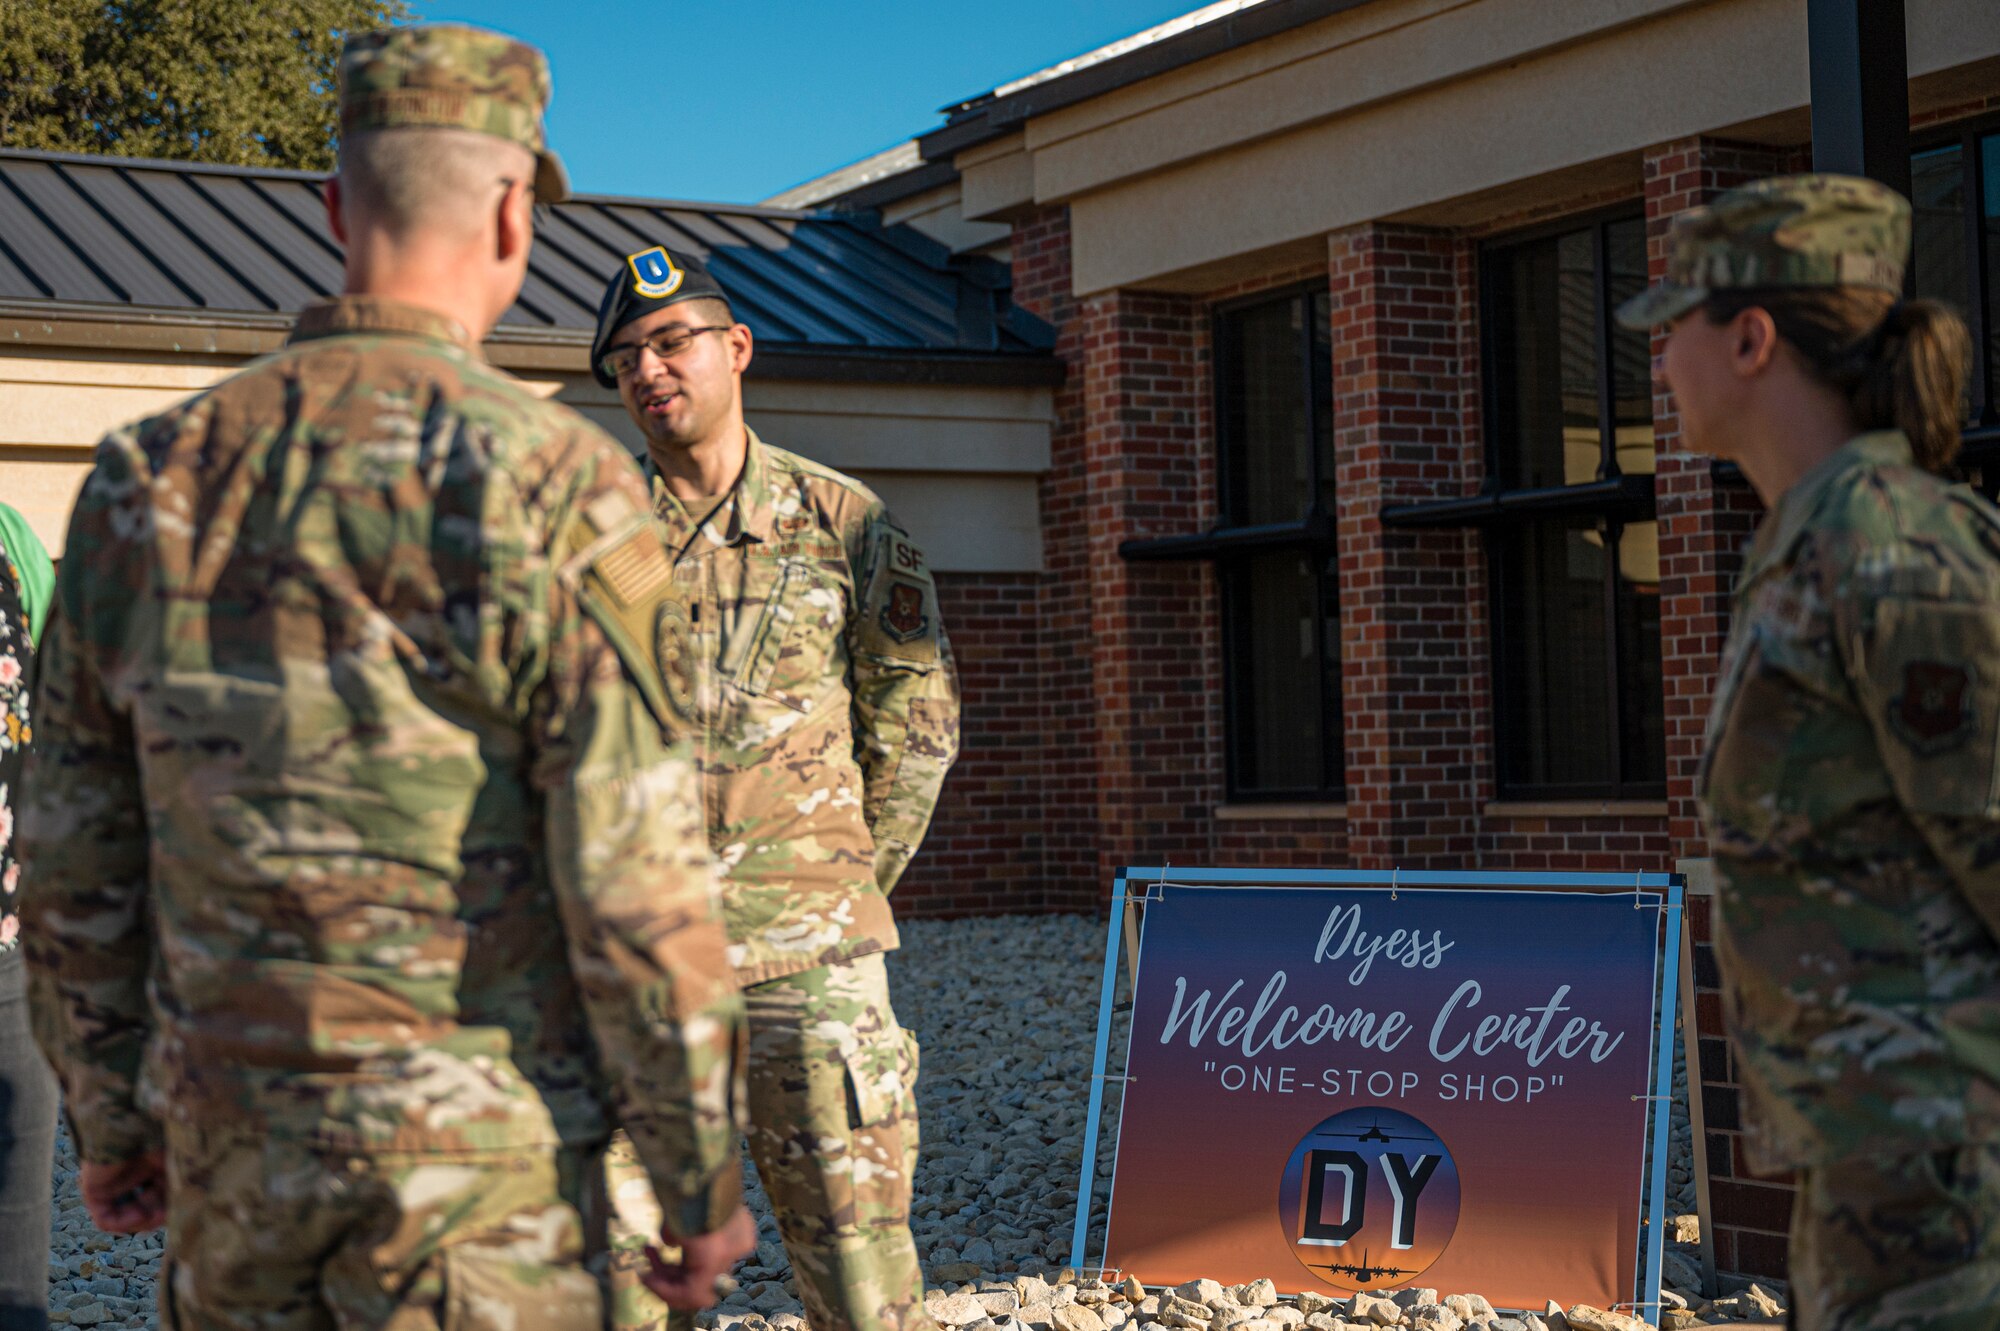 Lt. Gen. Mark Weatherington, Air Force Global Strike Command deputy commander, is greeted at the 7th Force Support Squadron Welcome Center, Dyess Air Force Base, Texas, Sept. 23, 2022. The Dyess Welcome Center increases readiness, reducing relocation and in-processing stress by providing a one-stop shop for our military members and their families. (U.S. Air Force photo by Senior Airman Reilly McGuire)